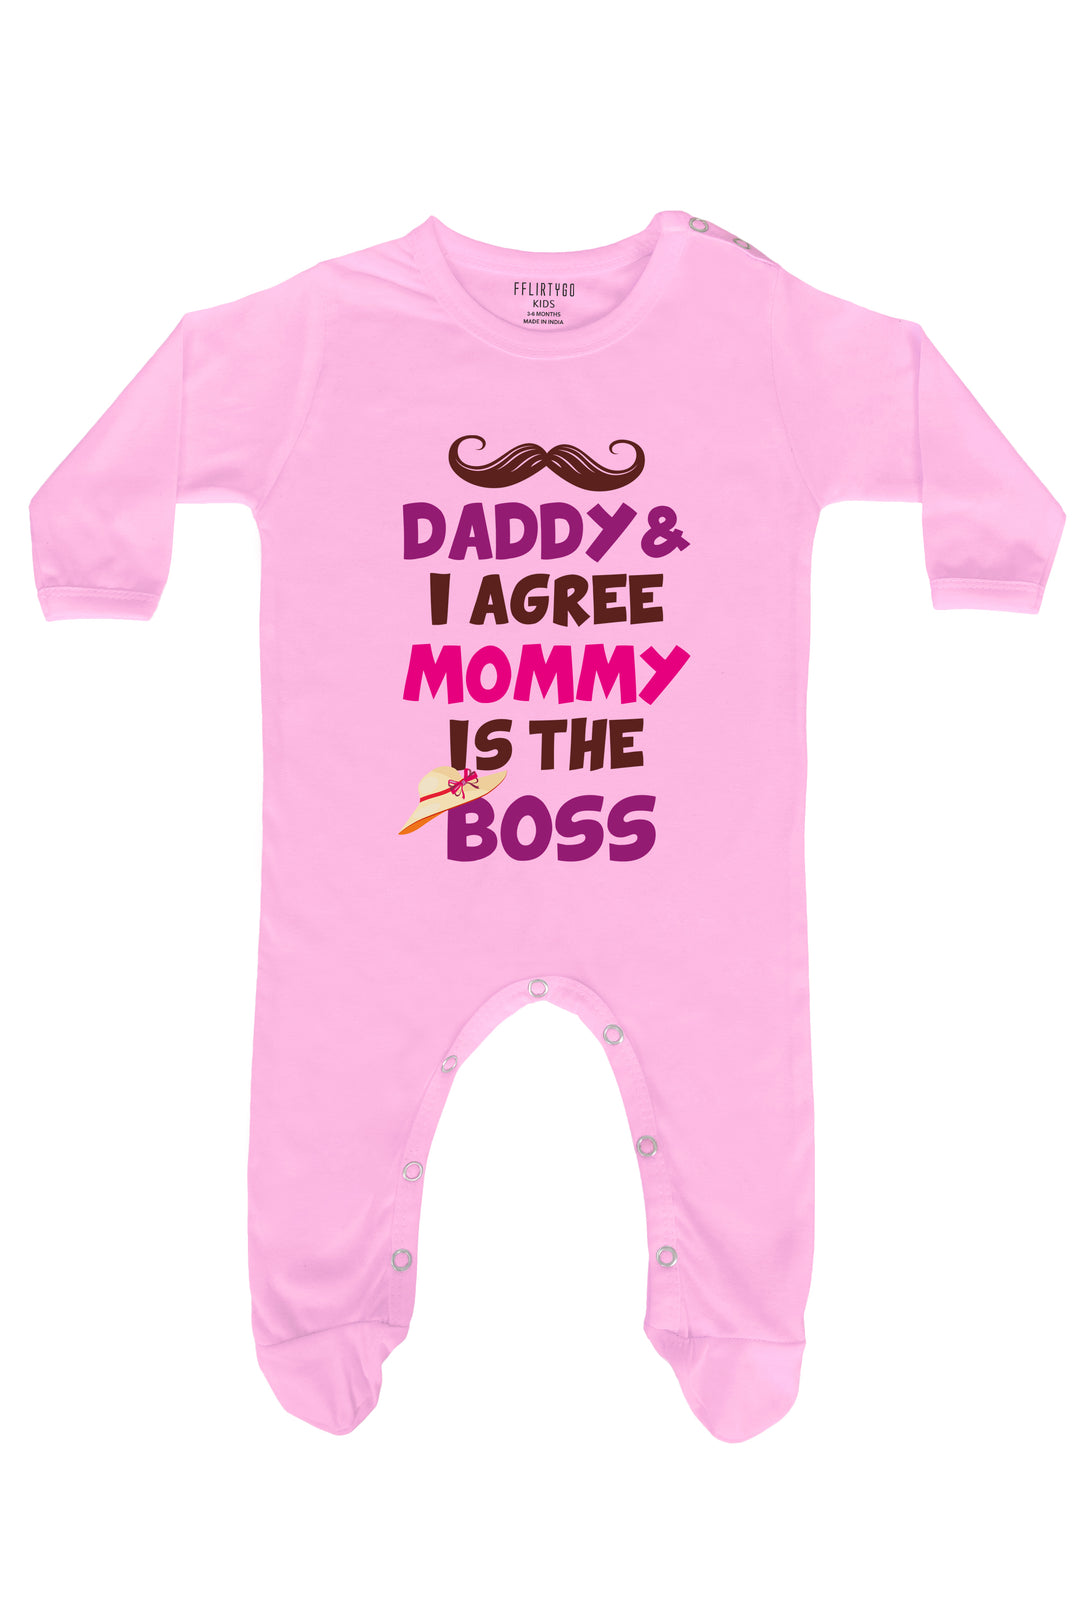 Daddy and I Agree Mommy is The Boss Baby Romper | Onesies